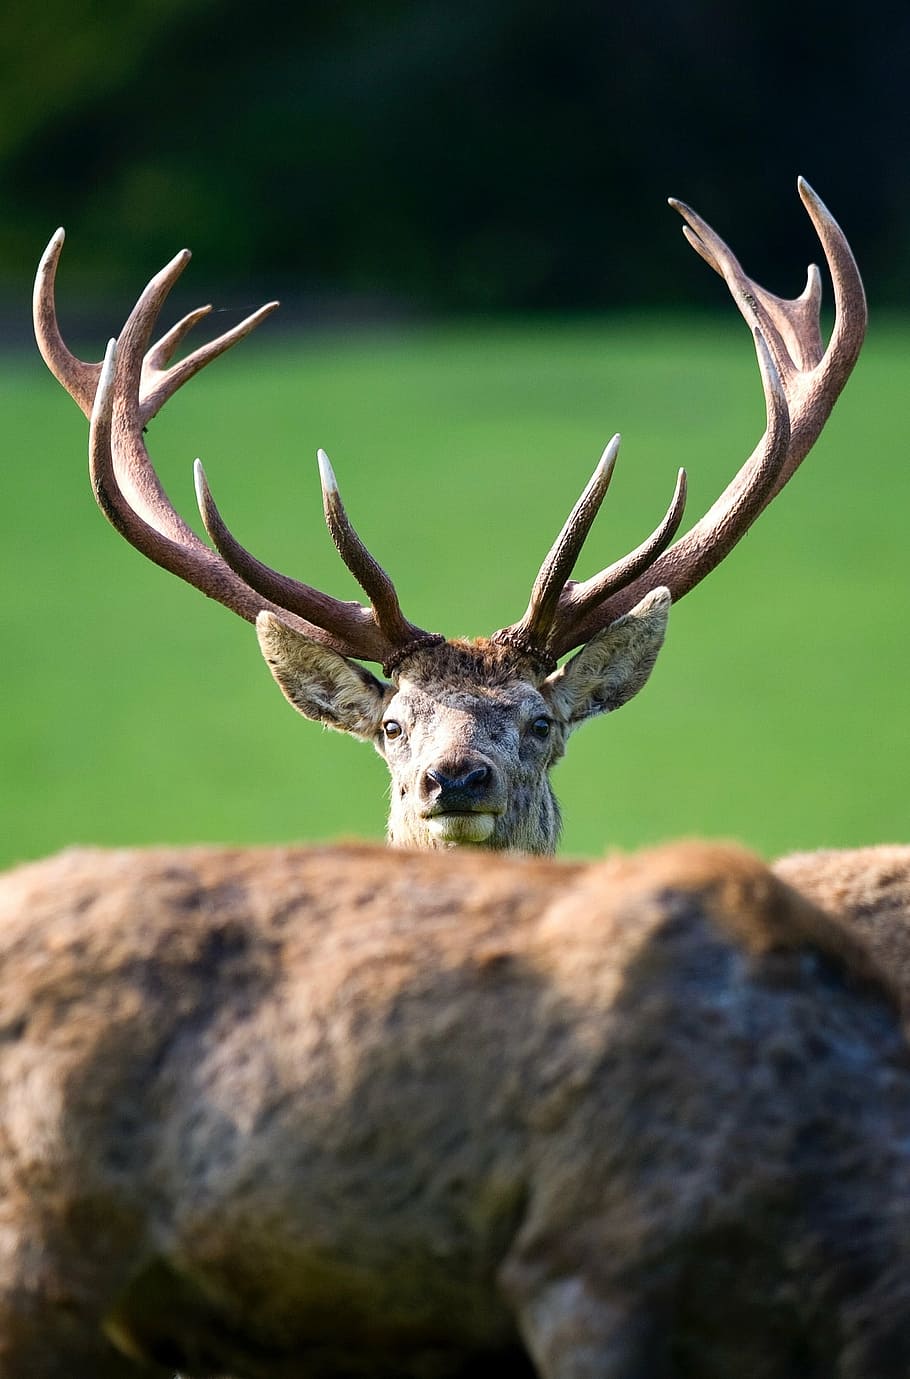 hirsch, red deer, antler, animal wildlife, one animal, stag, looking at camera, animals in the wild, portrait, animal themes